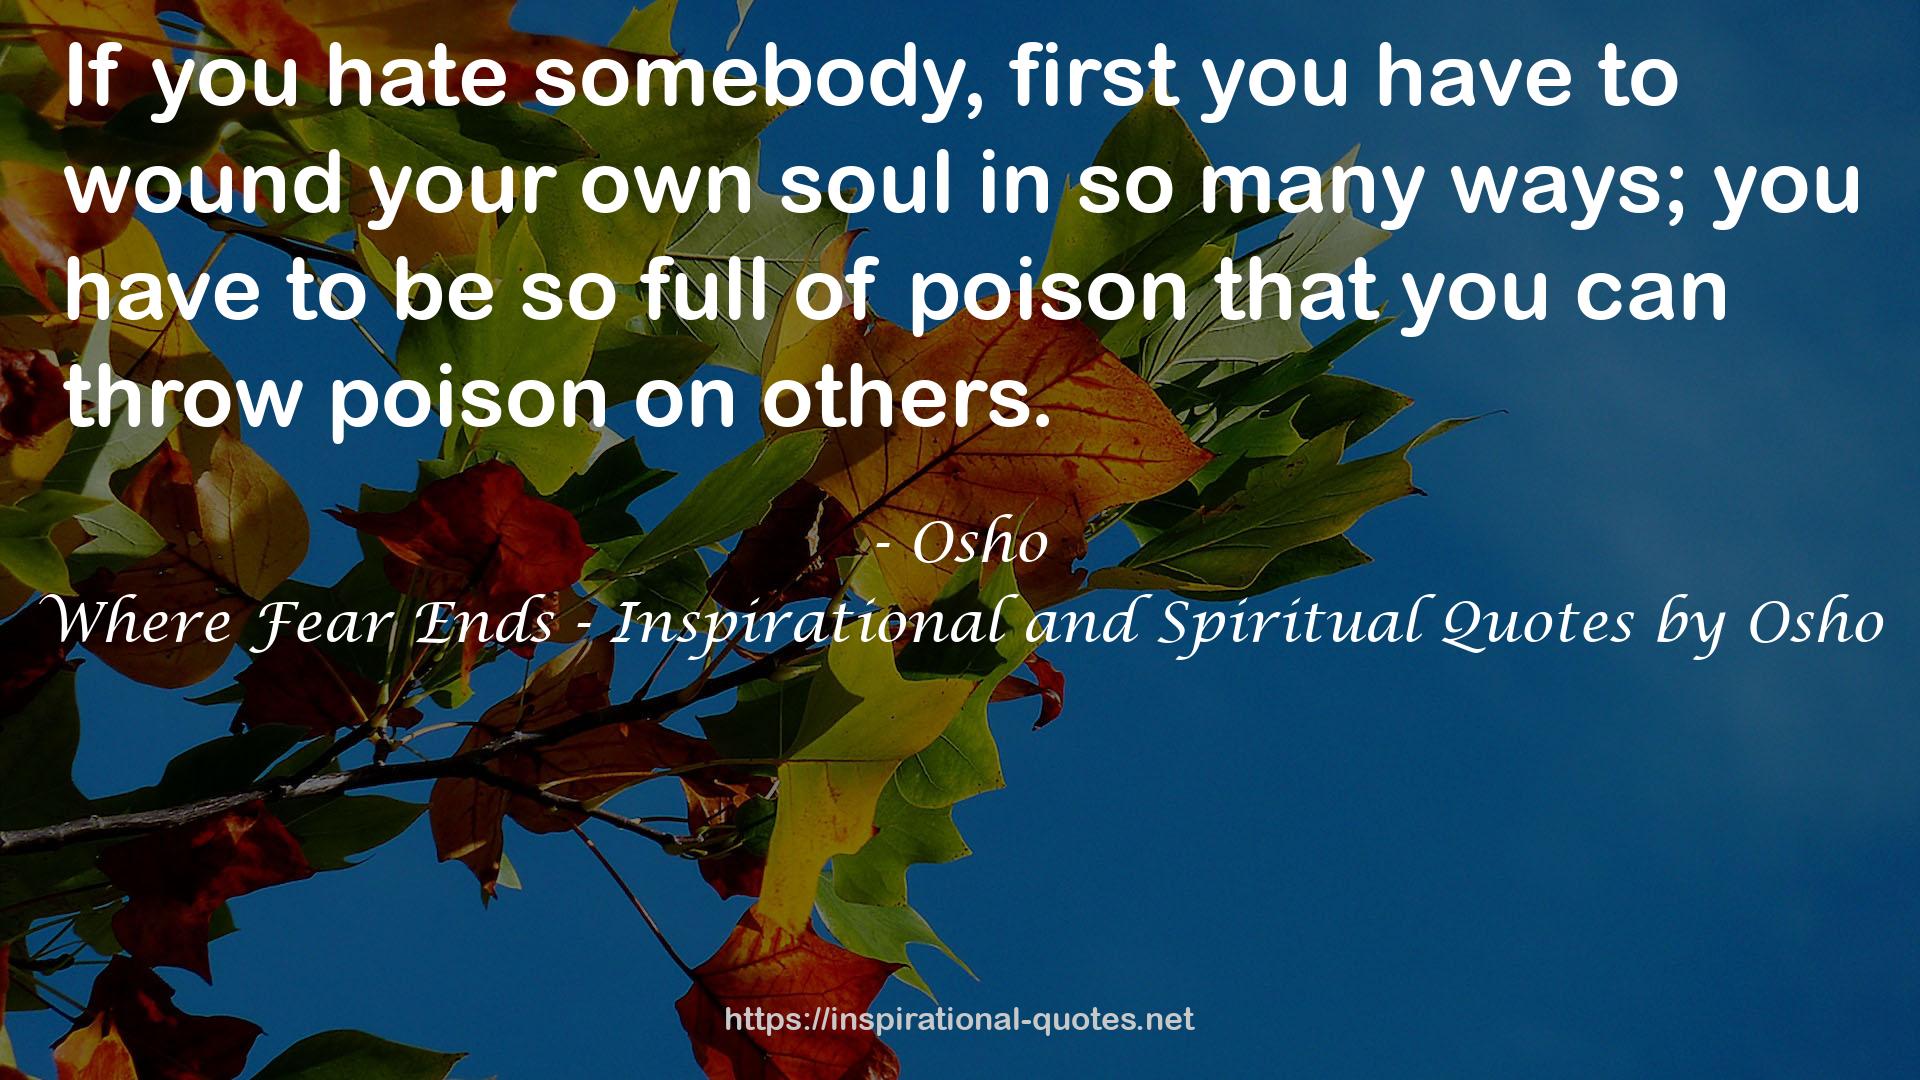 Where Fear Ends - Inspirational and Spiritual Quotes by Osho QUOTES